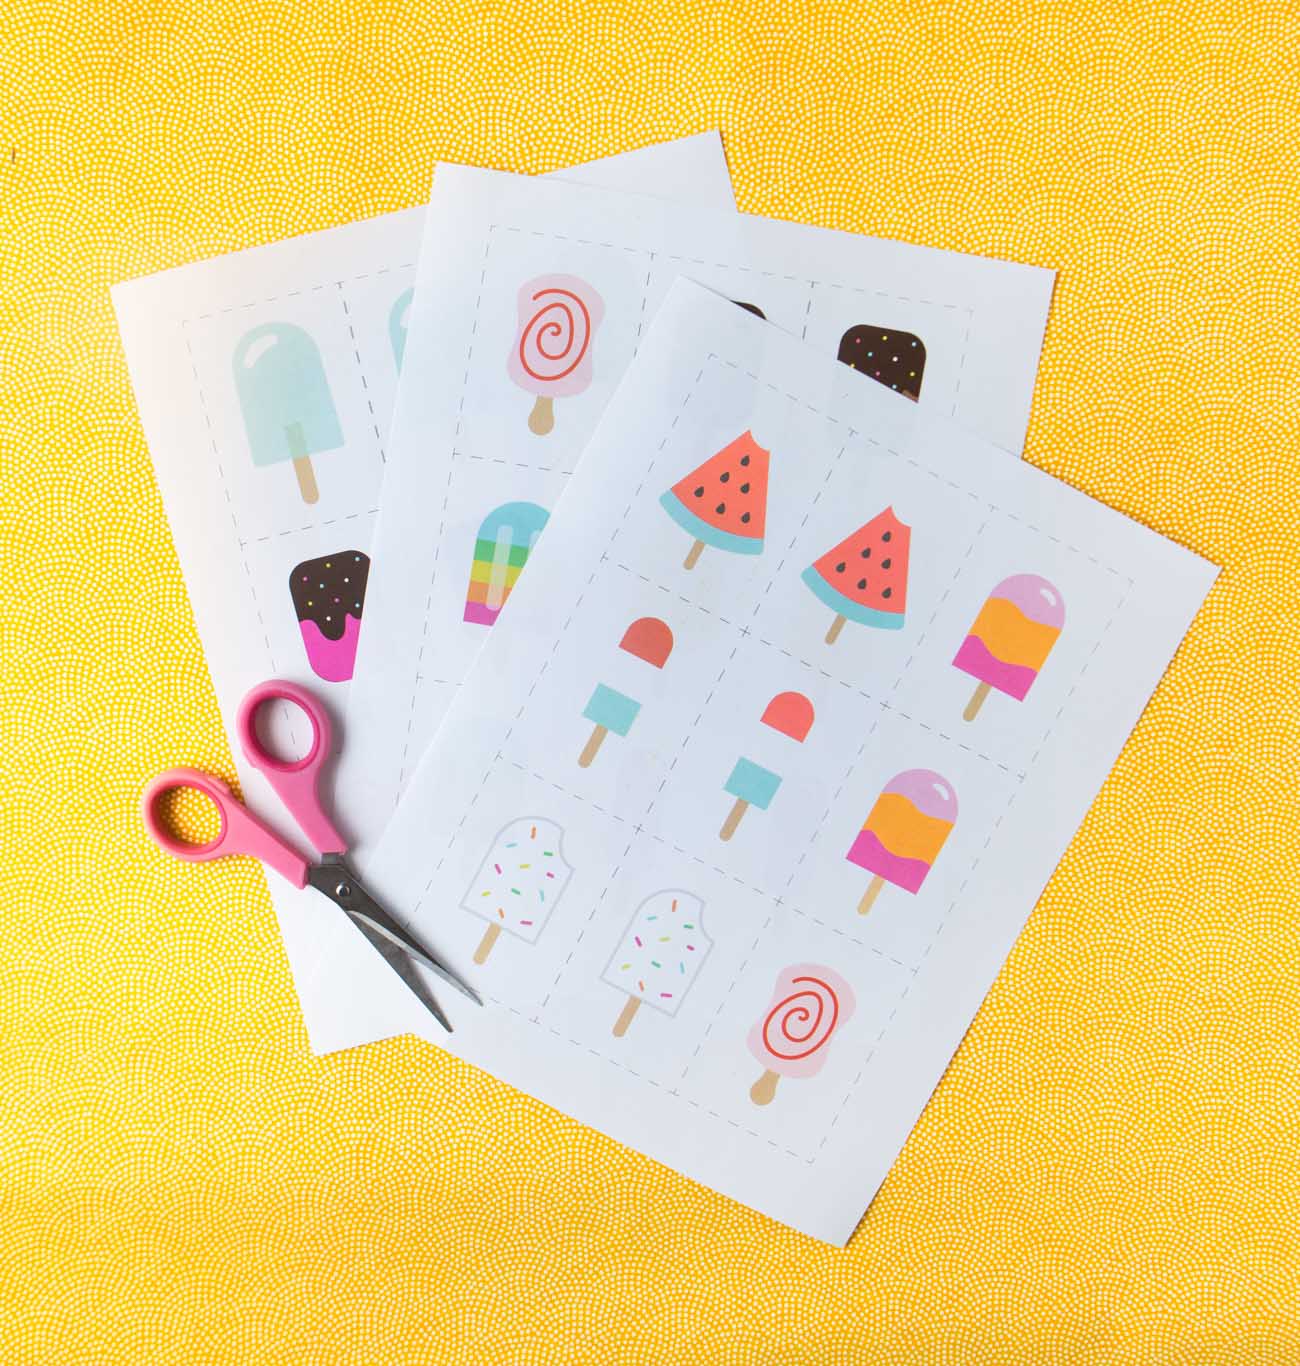 Printed sheets of paper with printable memory cards and scissors